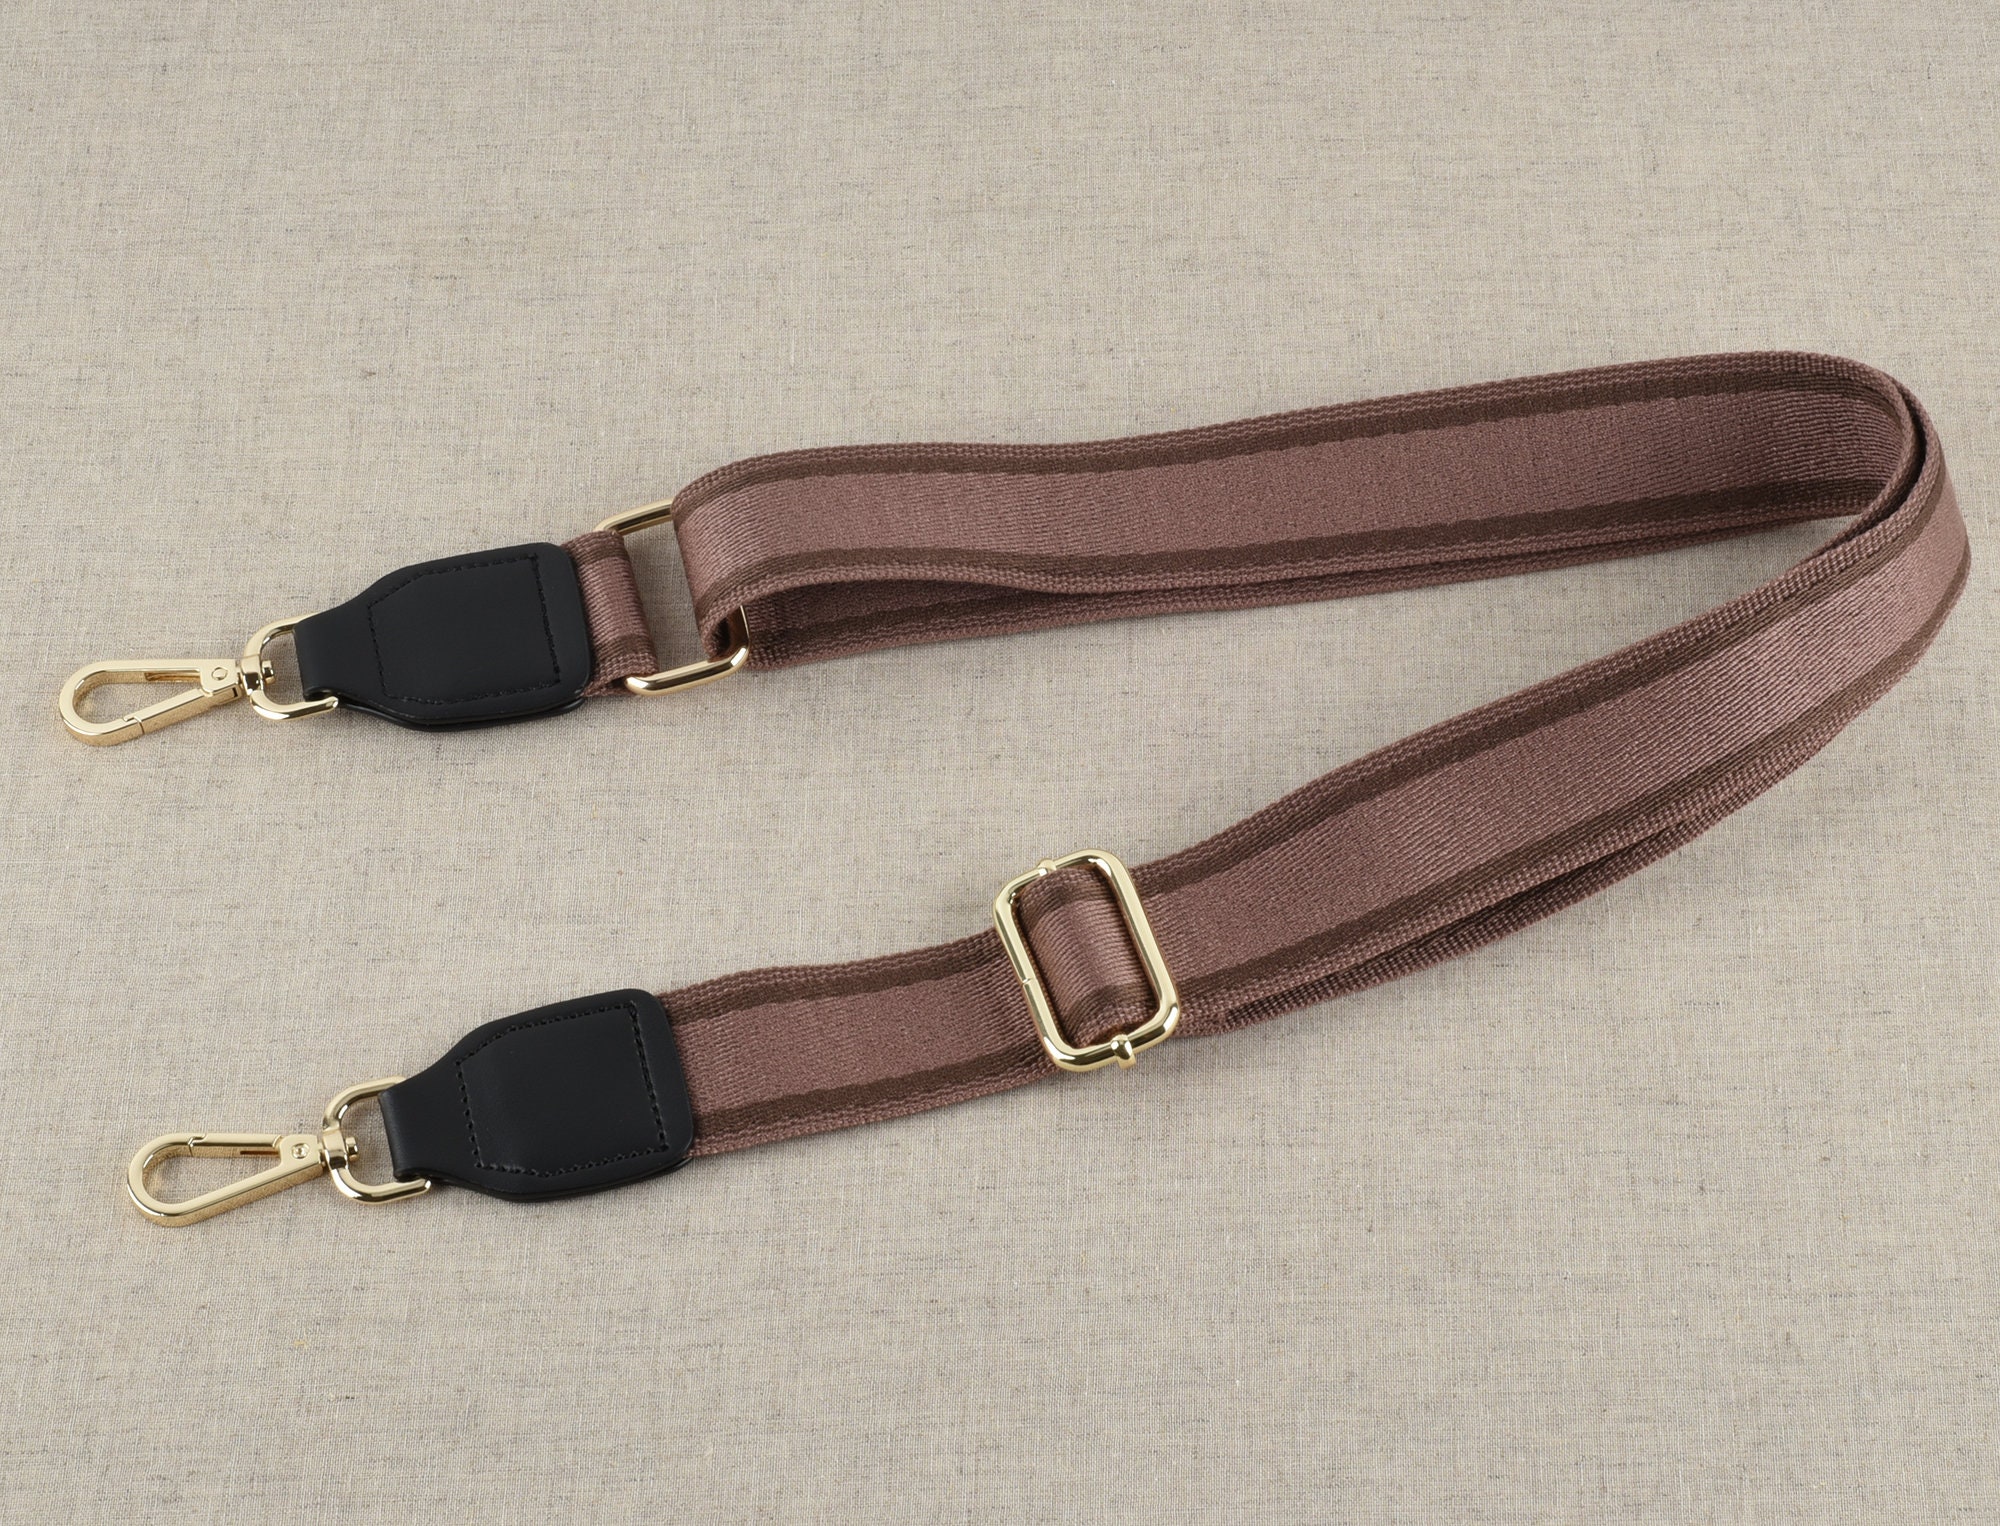 Wide Brown Crossbody Bag Strap Cotton, Leather Strap Replacement